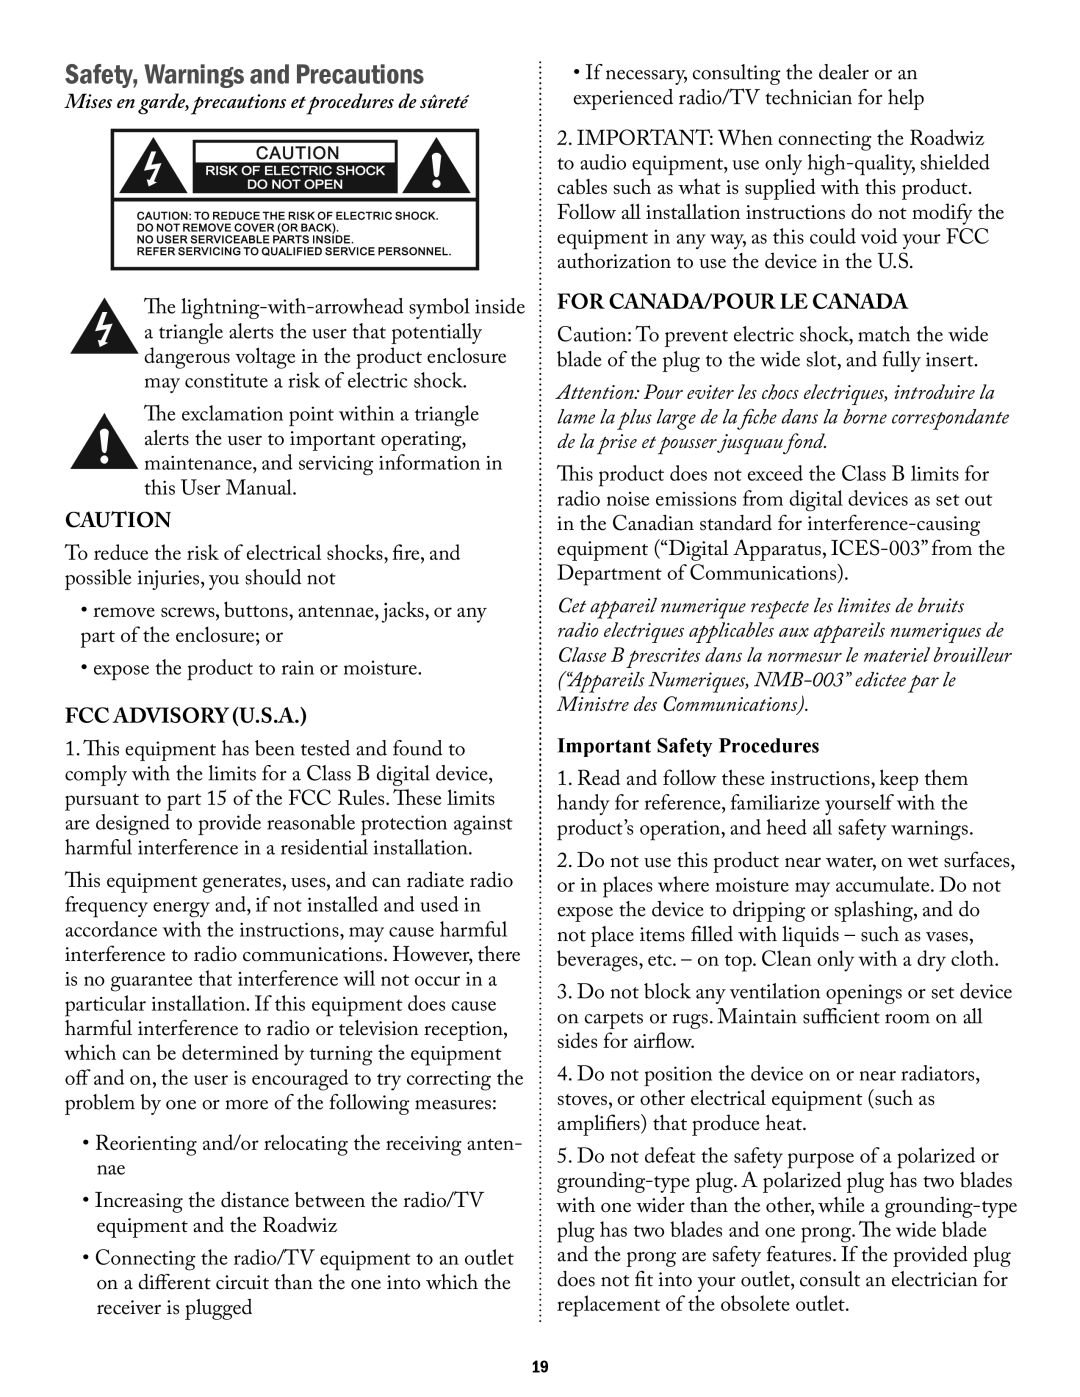 Acesonic PK-1290 user manual Safety, Warnings and Precautions, Fcc Advisory U.S.A, For Canada/Pour Le Canada 